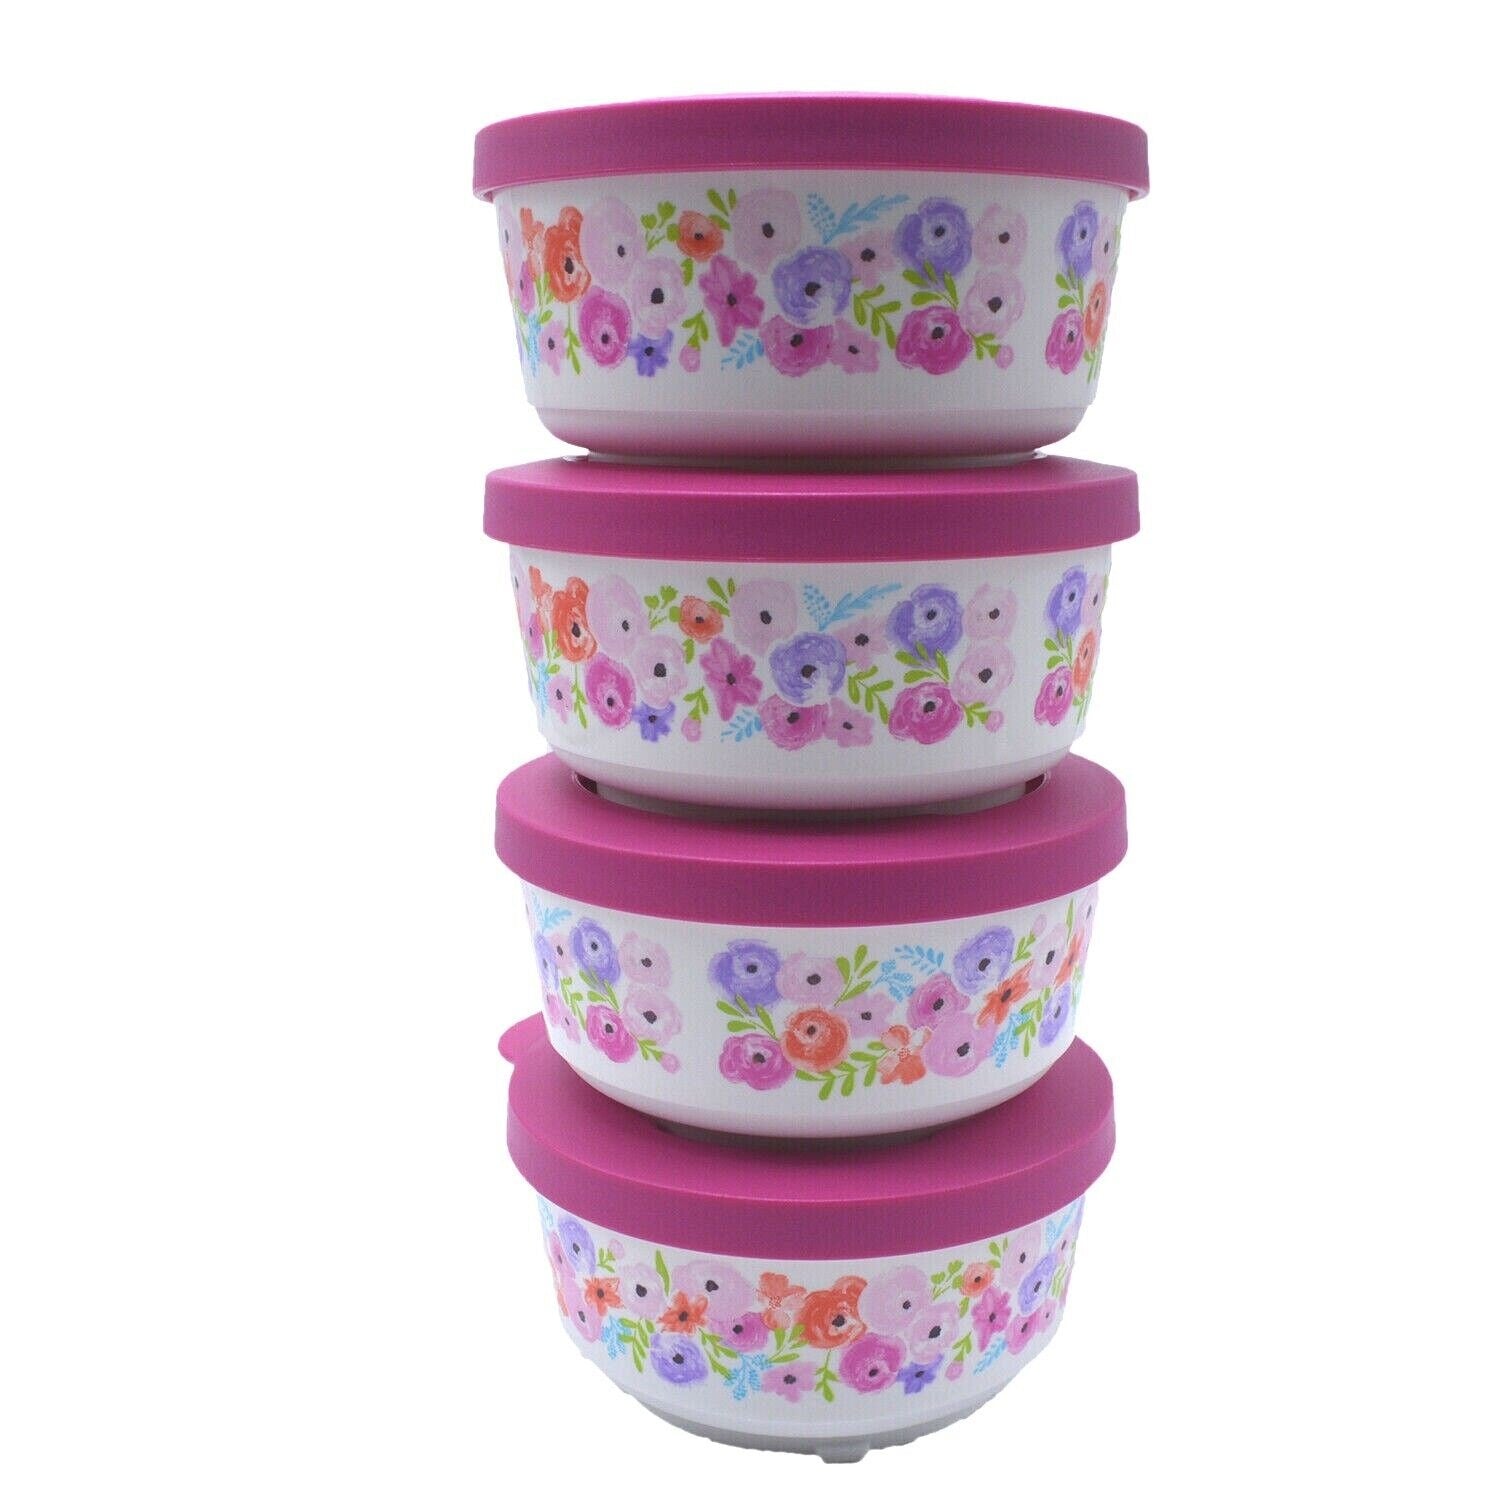 TUPPERWARE Snack Cups Set of 2 Small Bowls Lids 4 oz Lavender Purple Pink  Seals